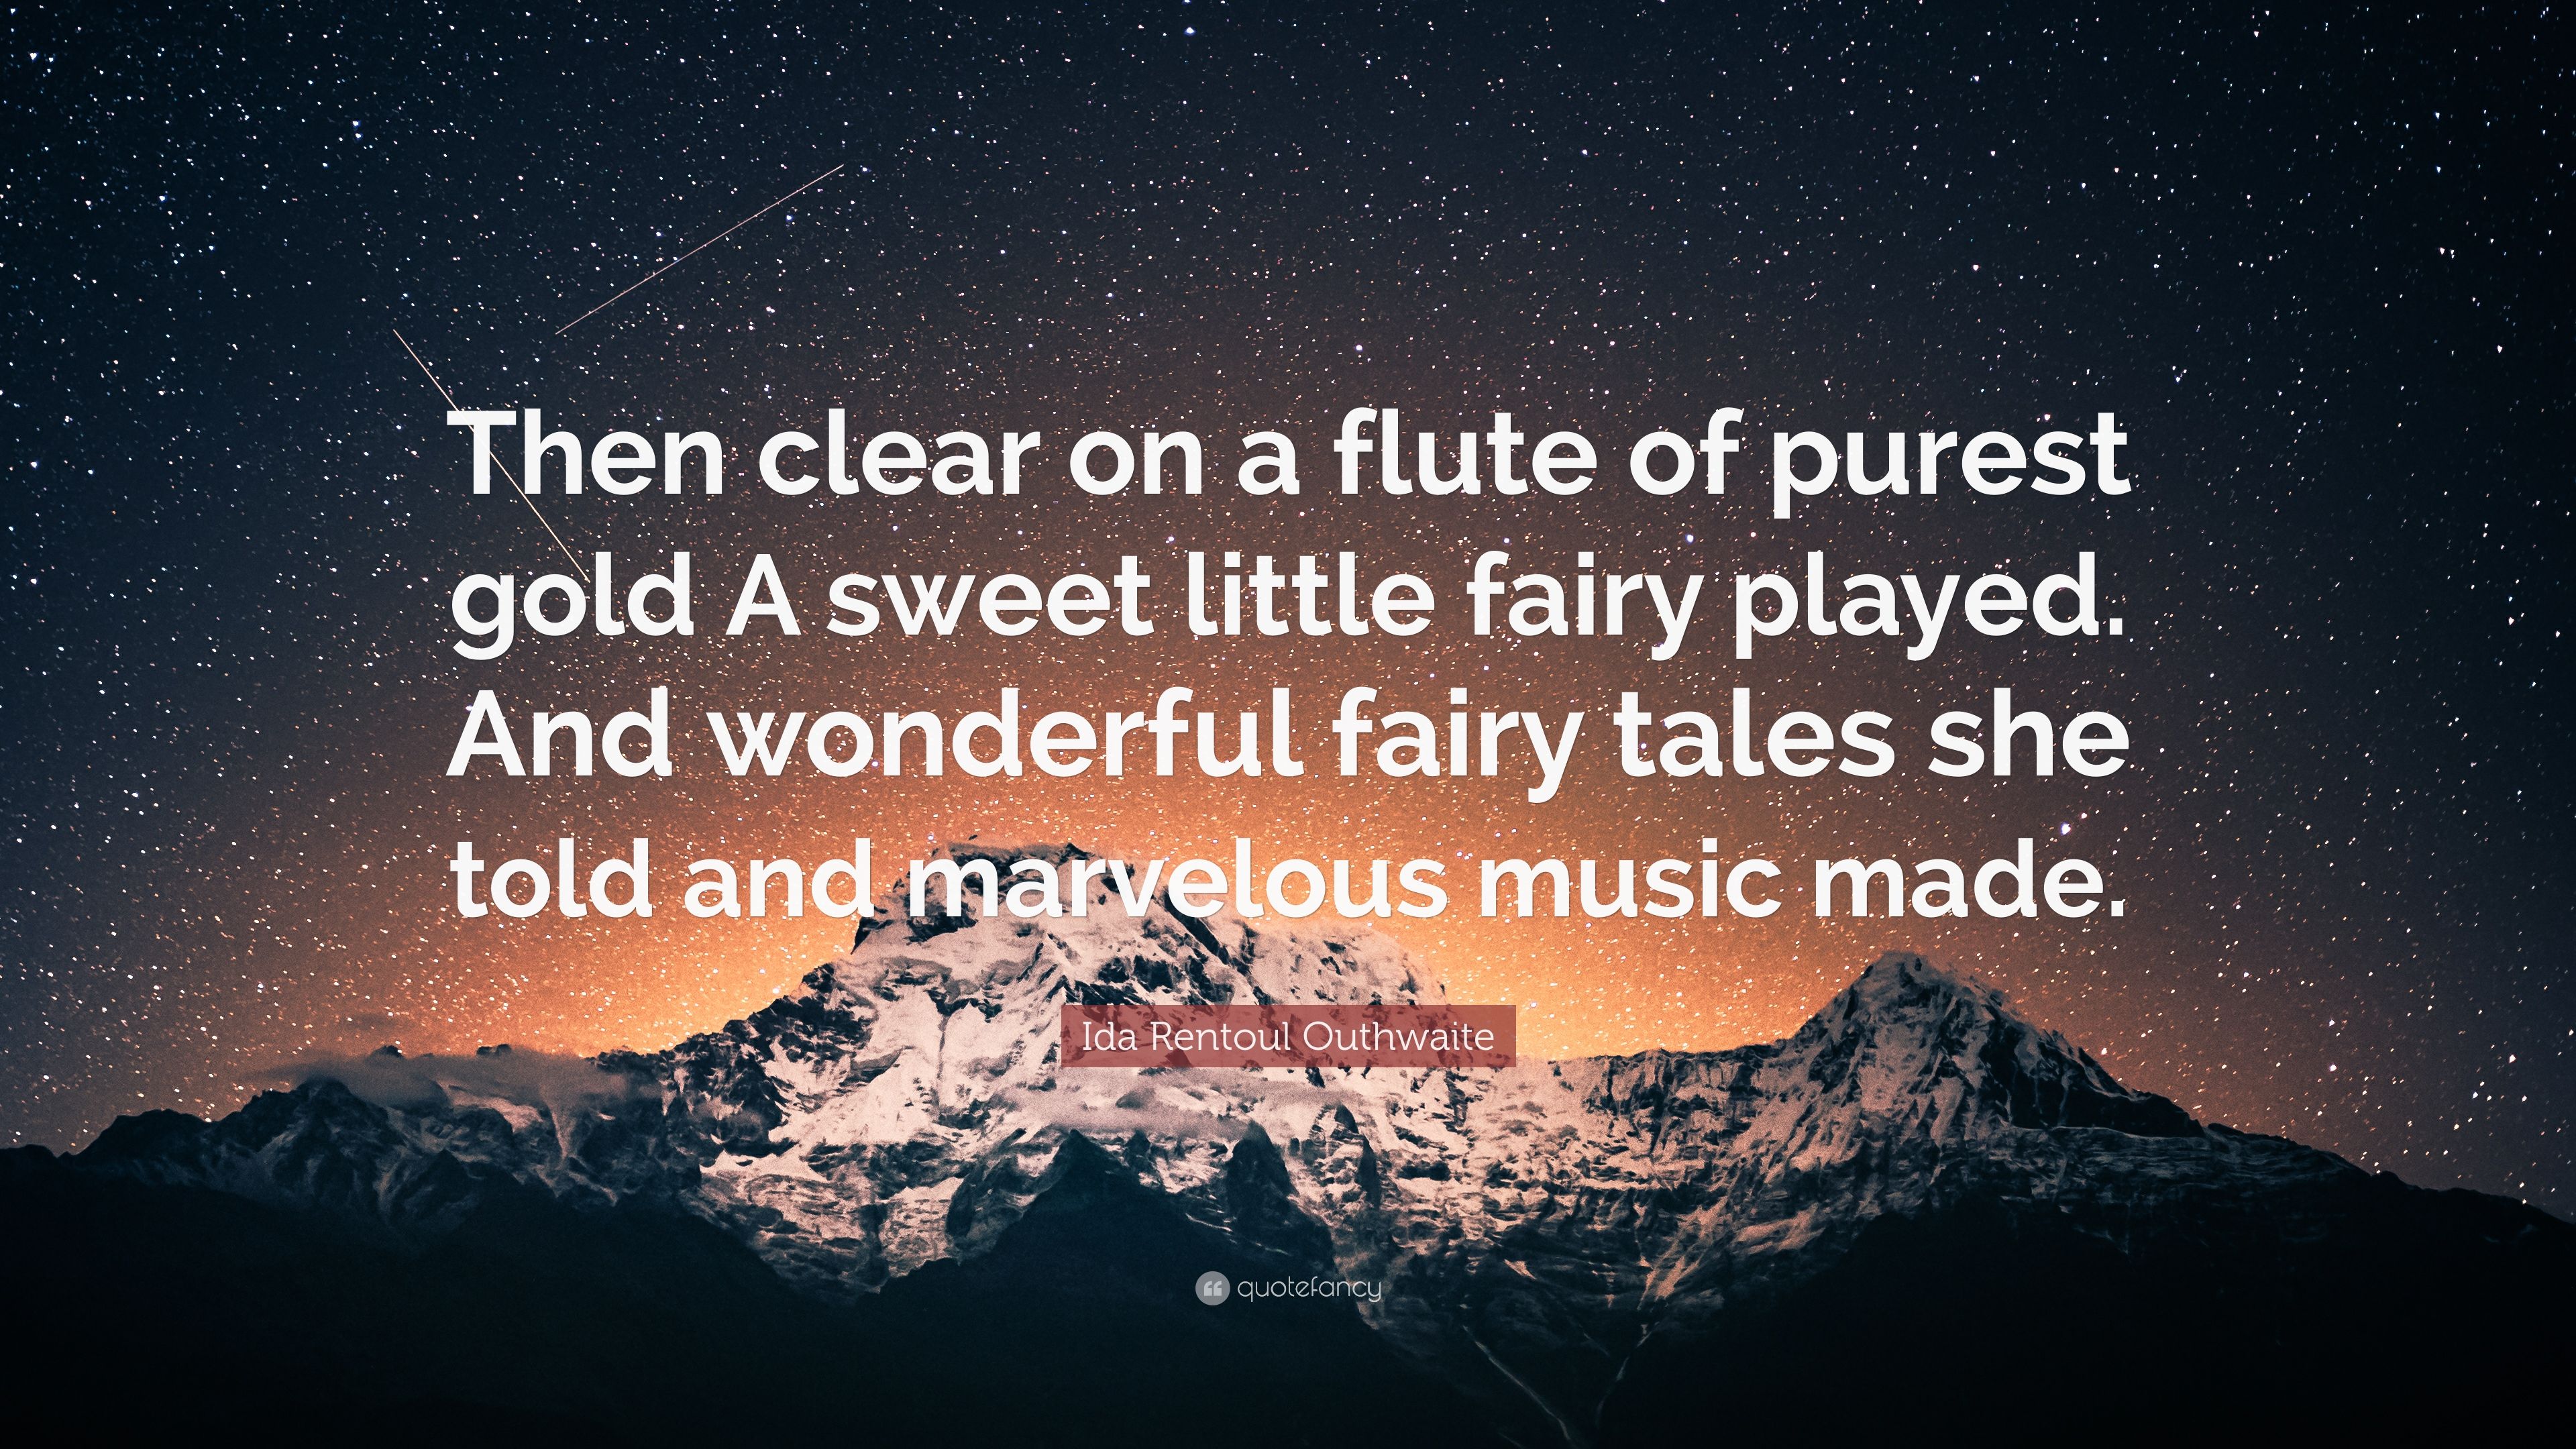 Ida Rentoul Outhwaite Quote: “Then clear on a flute of purest gold A